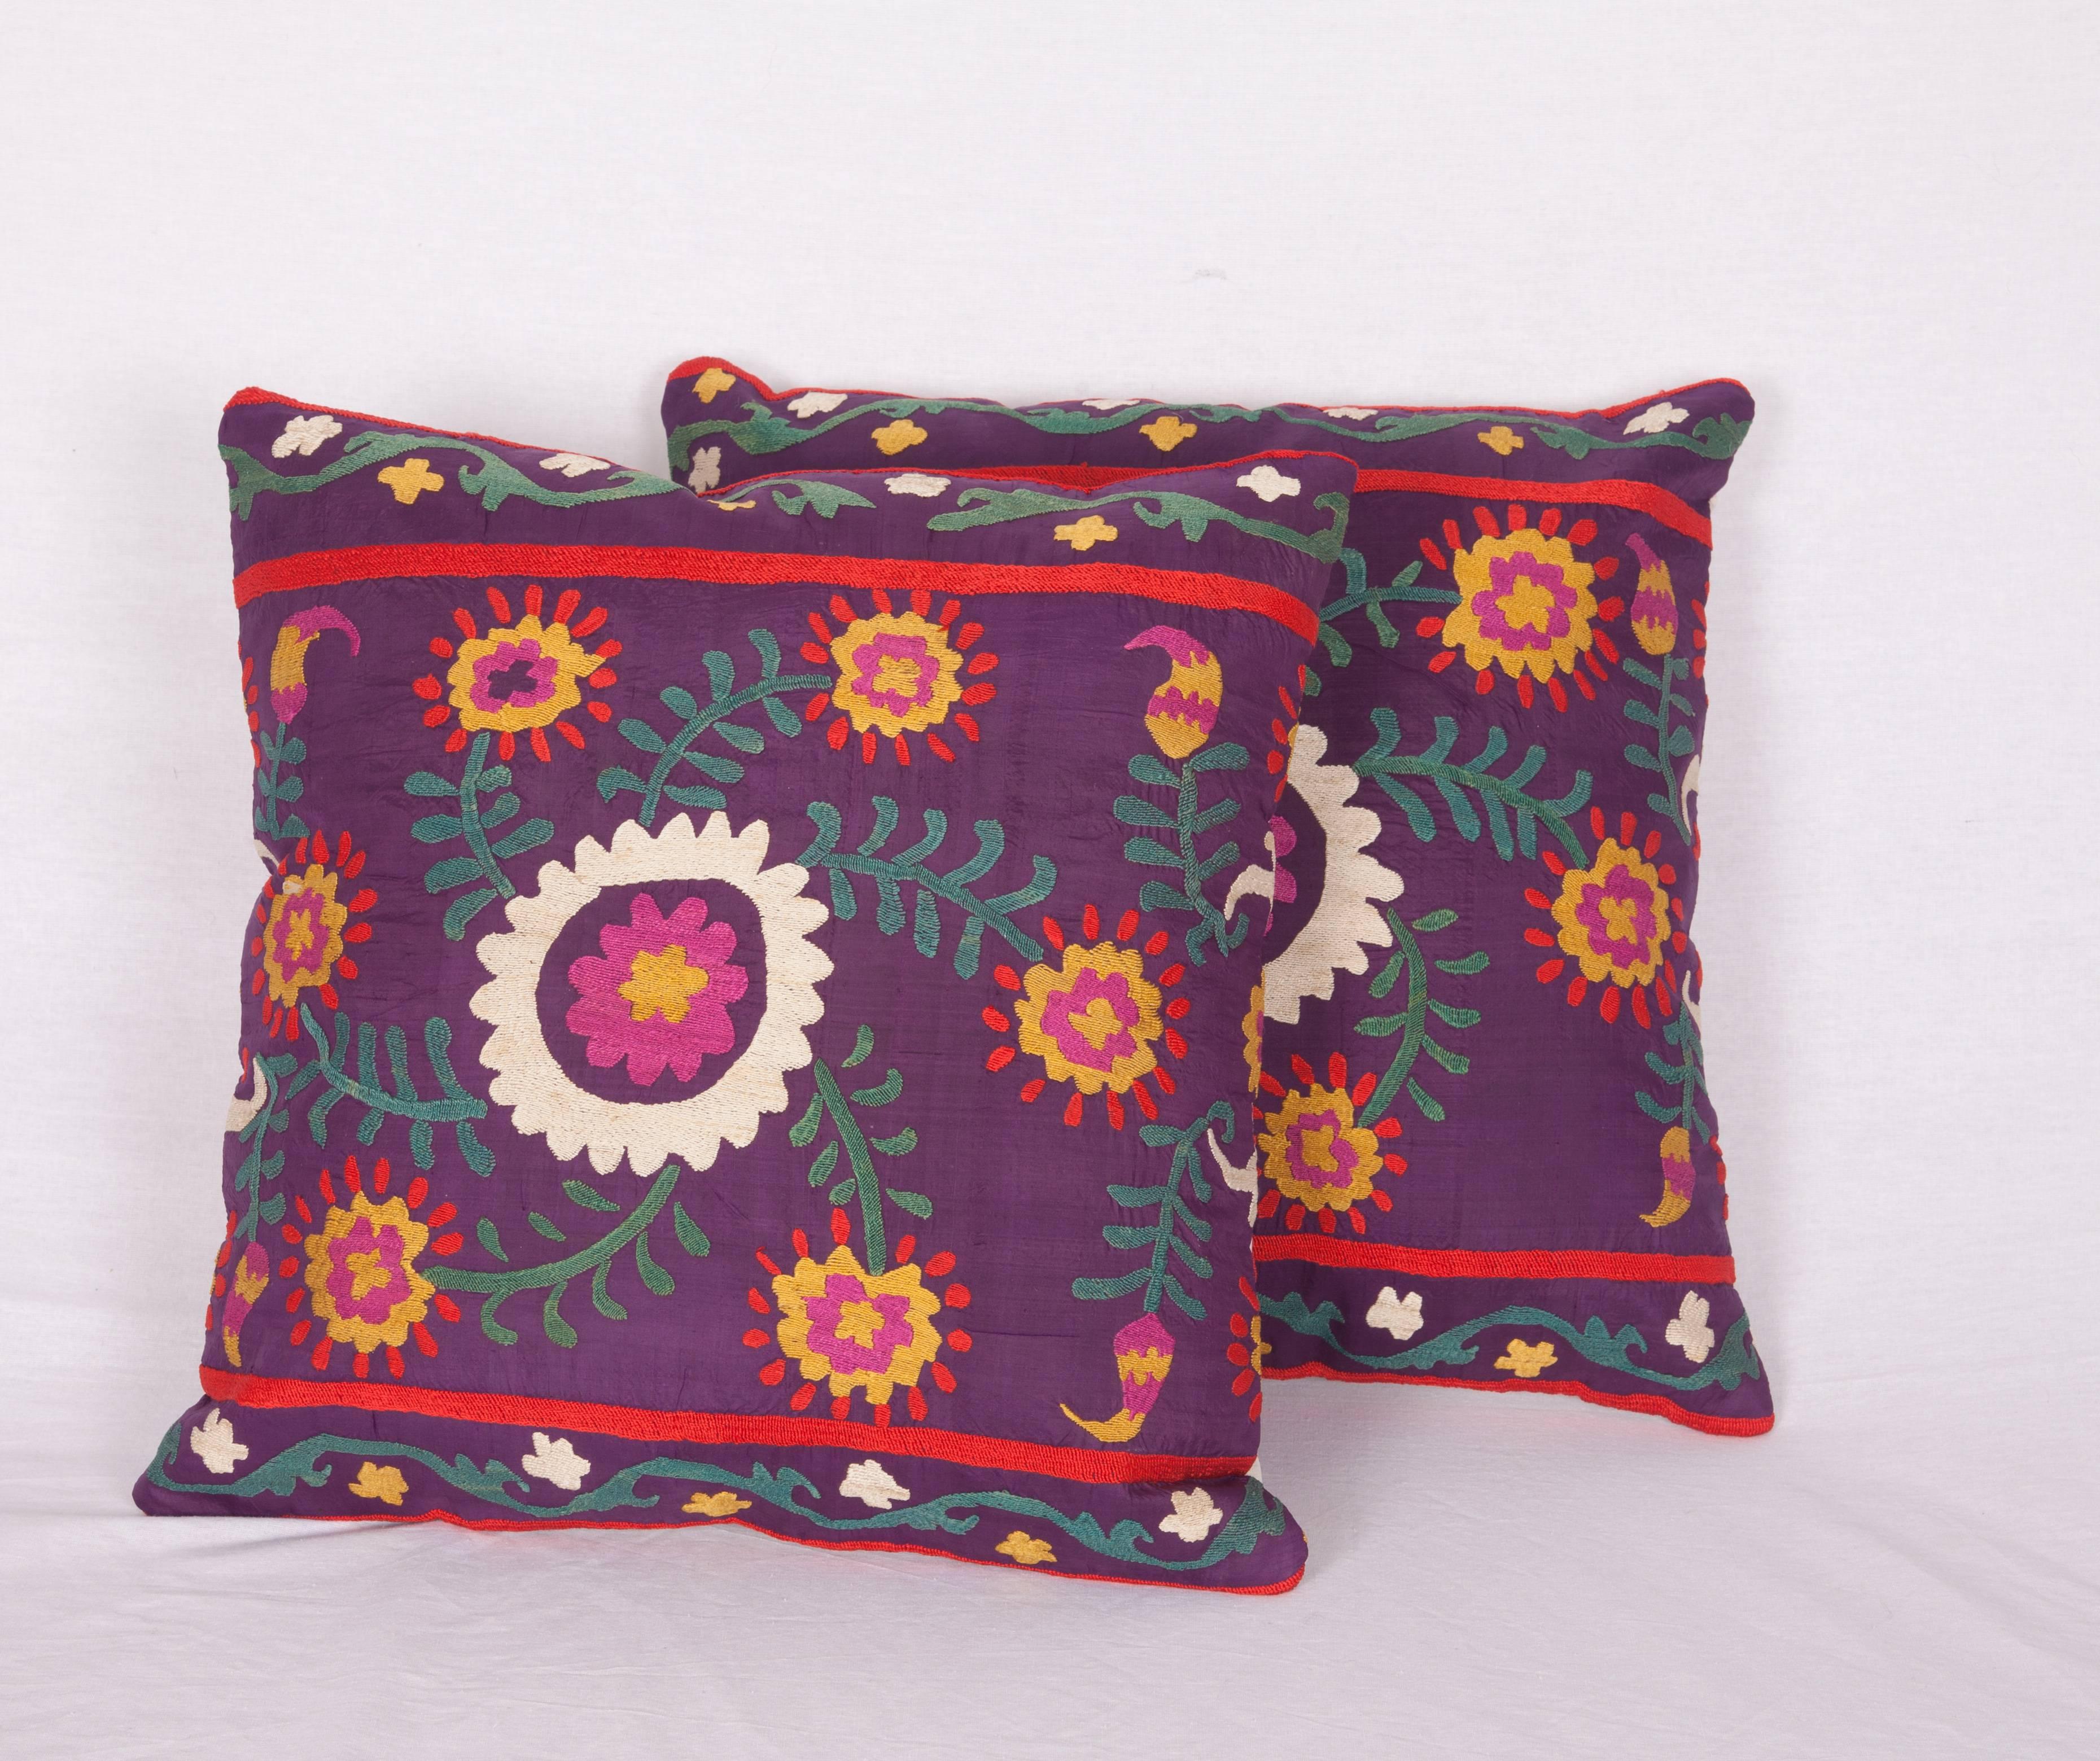 The pillow cases are made out of an early 20th century Uzbek Samarkand silk Suzani. It does not come with an insert but it comes with a bag made to the size and out of cotton to accommodate the filling. The backing is made of linen. Please note '